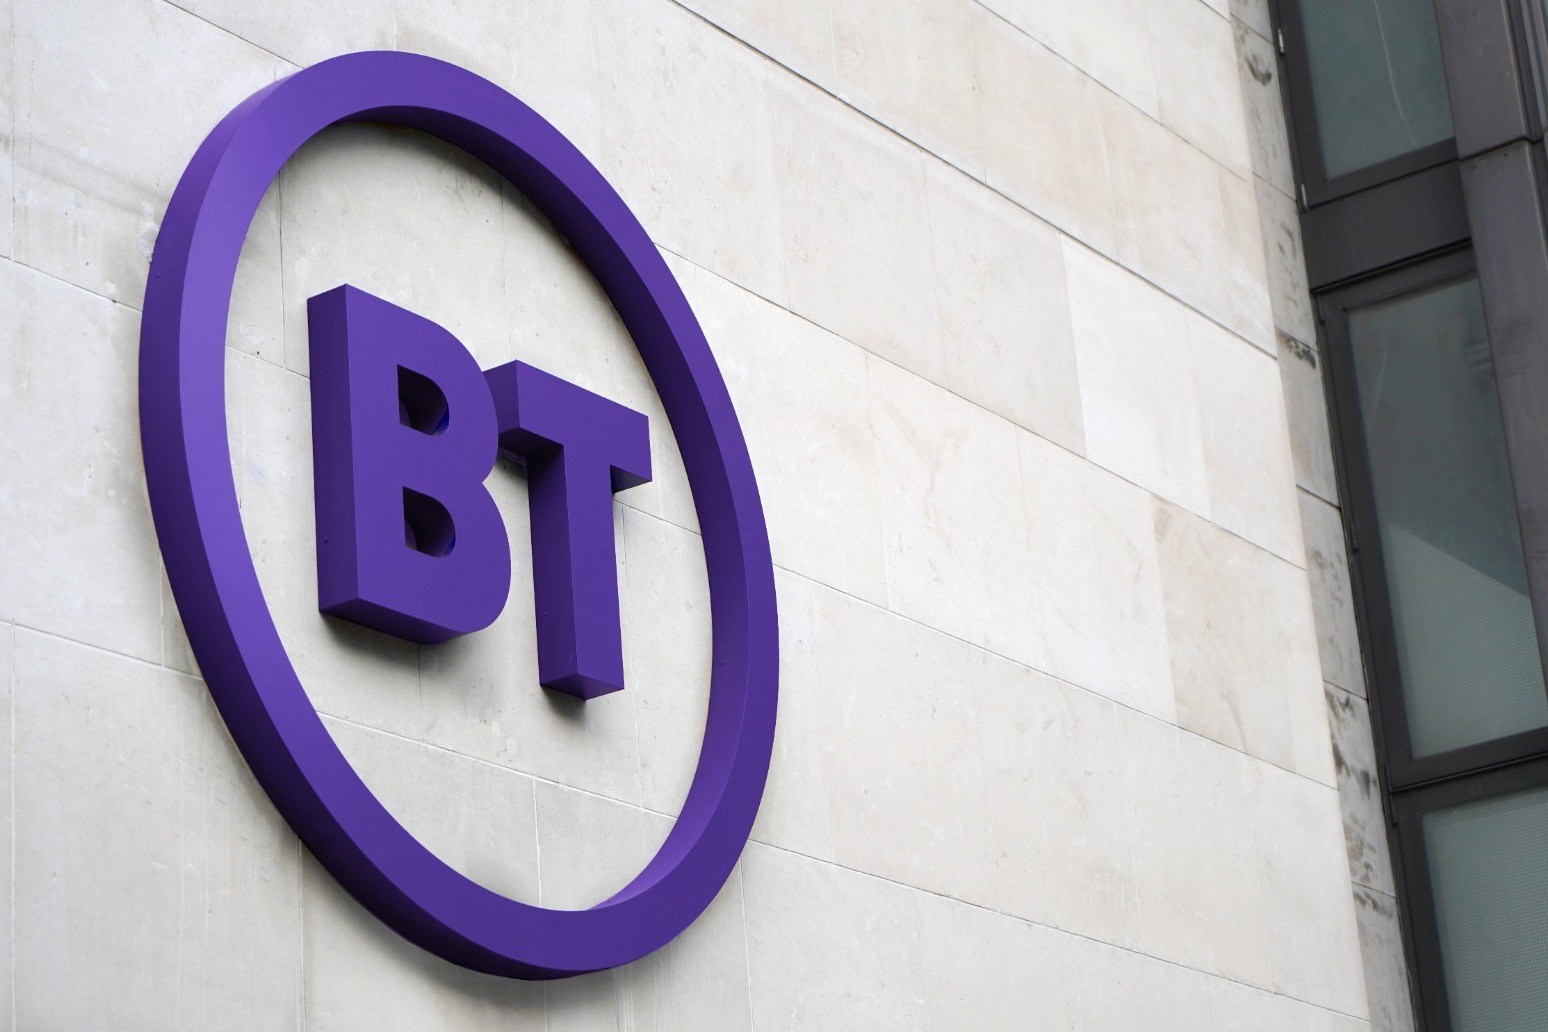 BT chief urged to meet union over pay dispute 